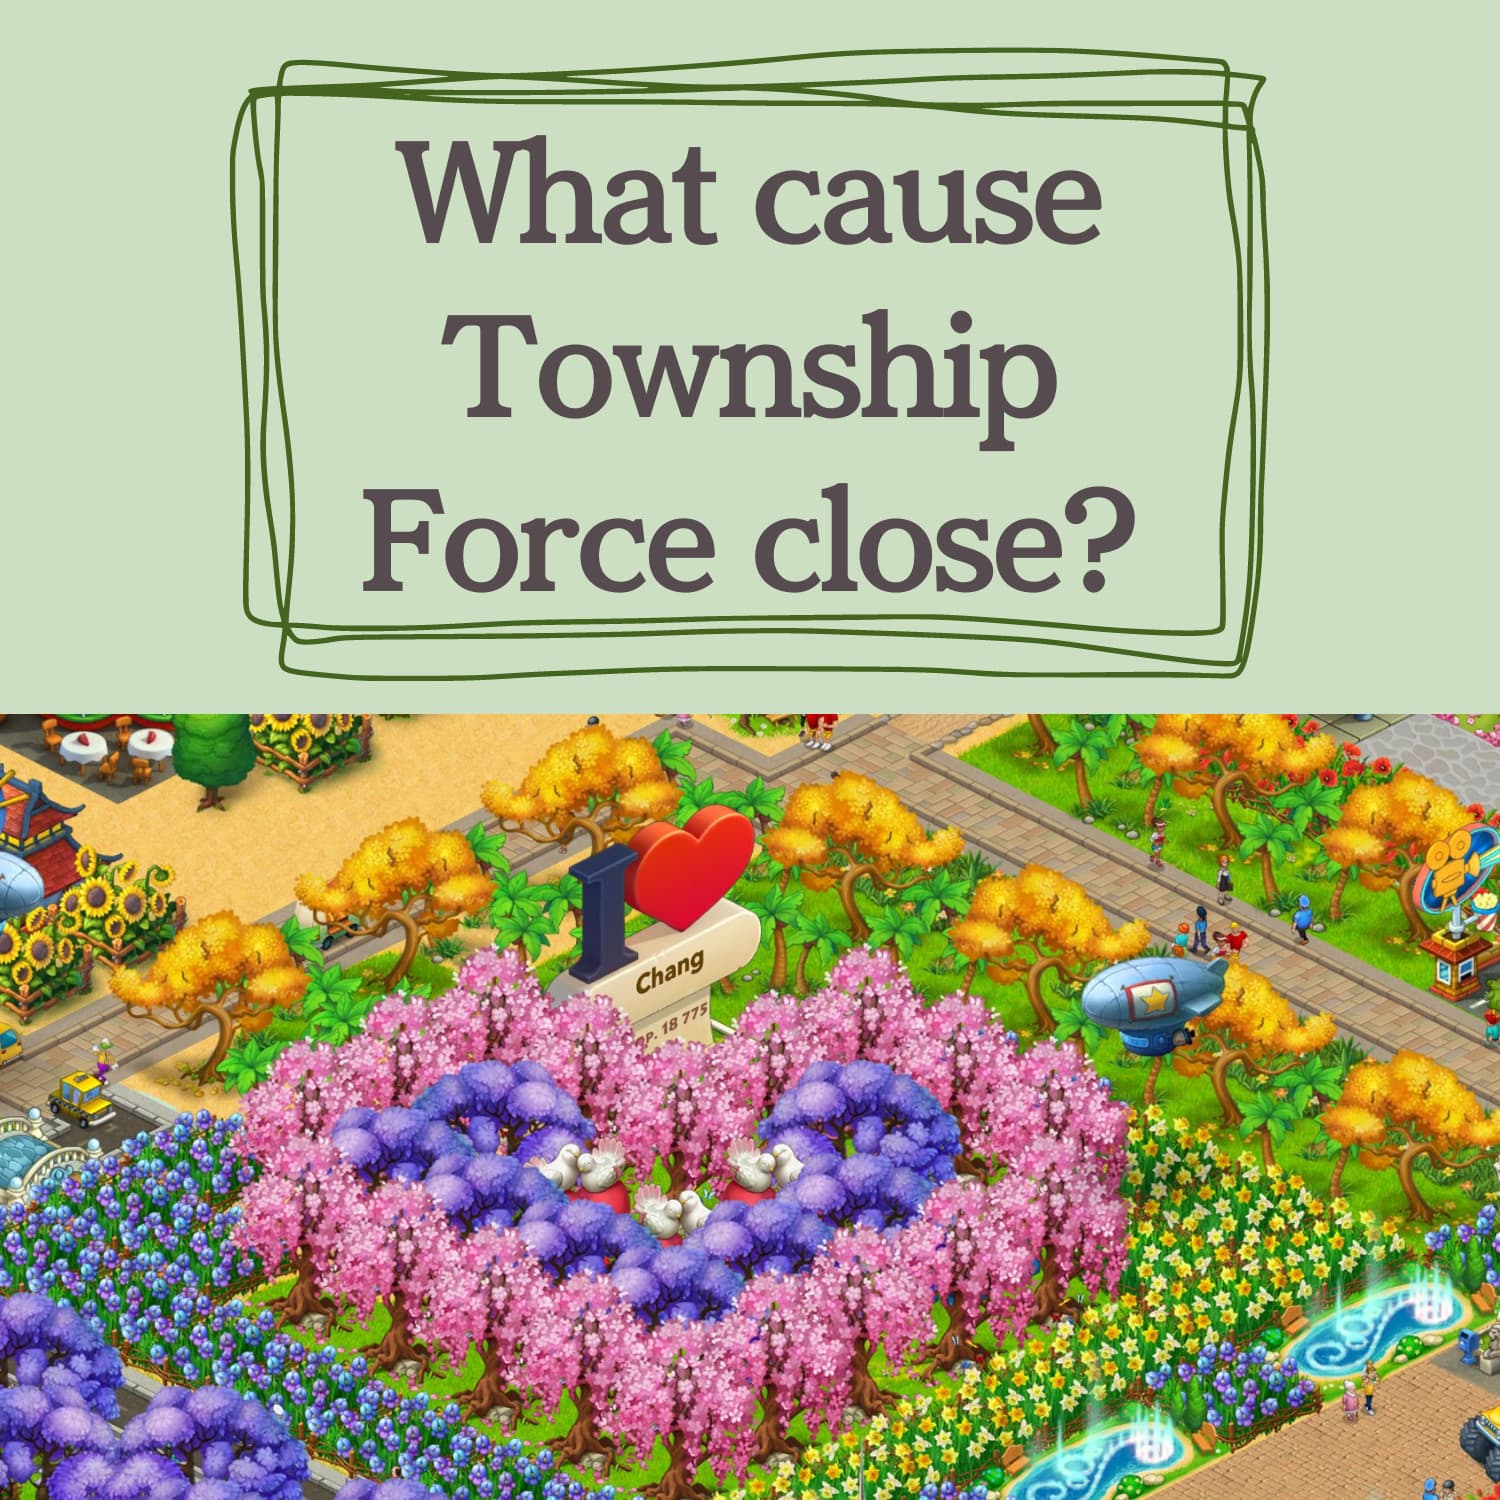 What causes Township to force close and what can I do about it?